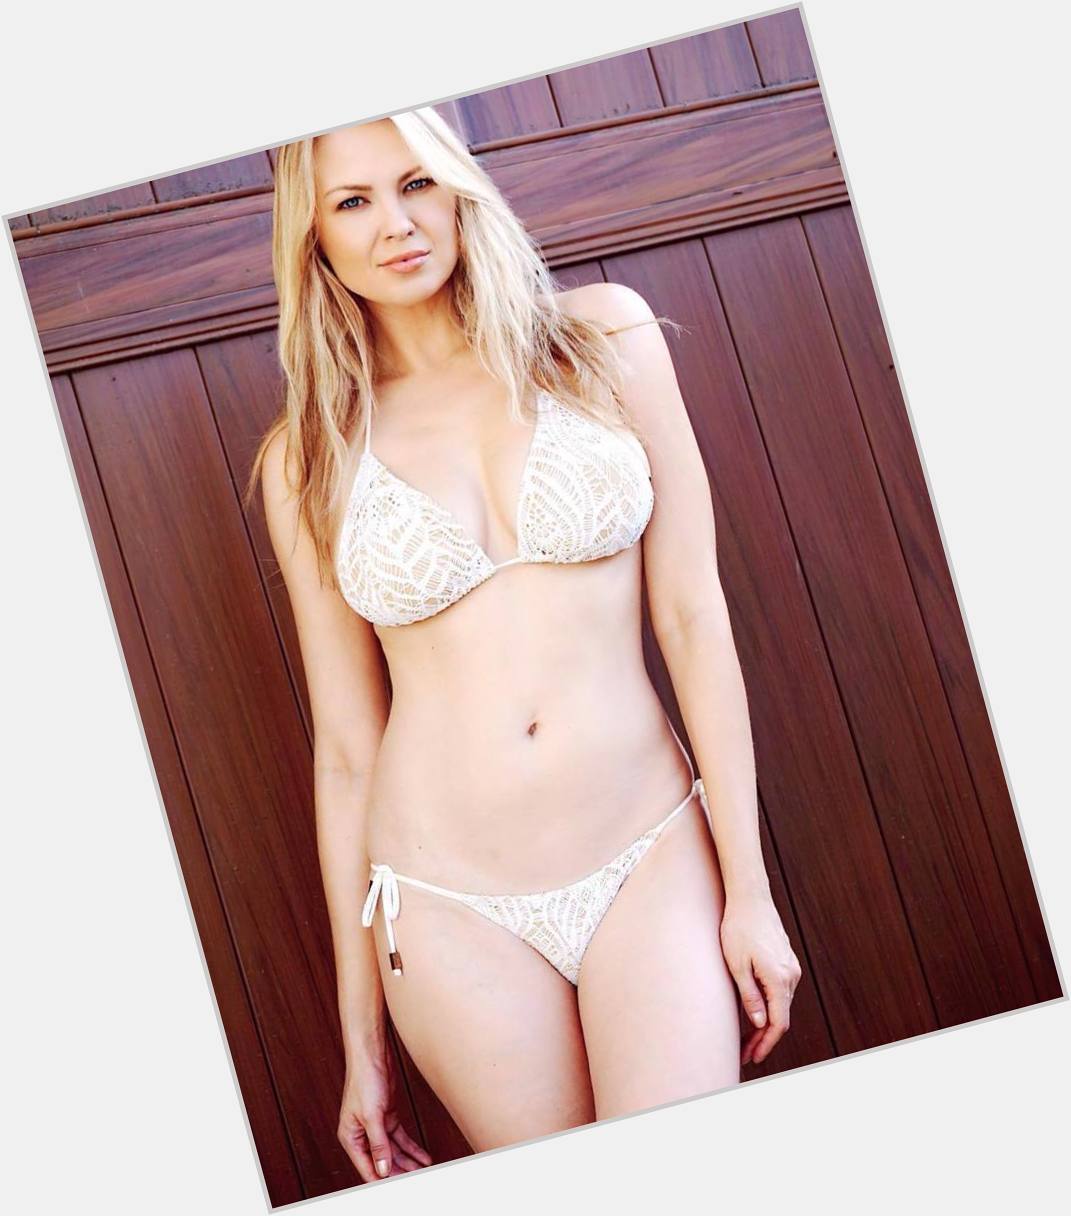   Irina Voronina! I\ll probably say this for many more years, but I swear y 